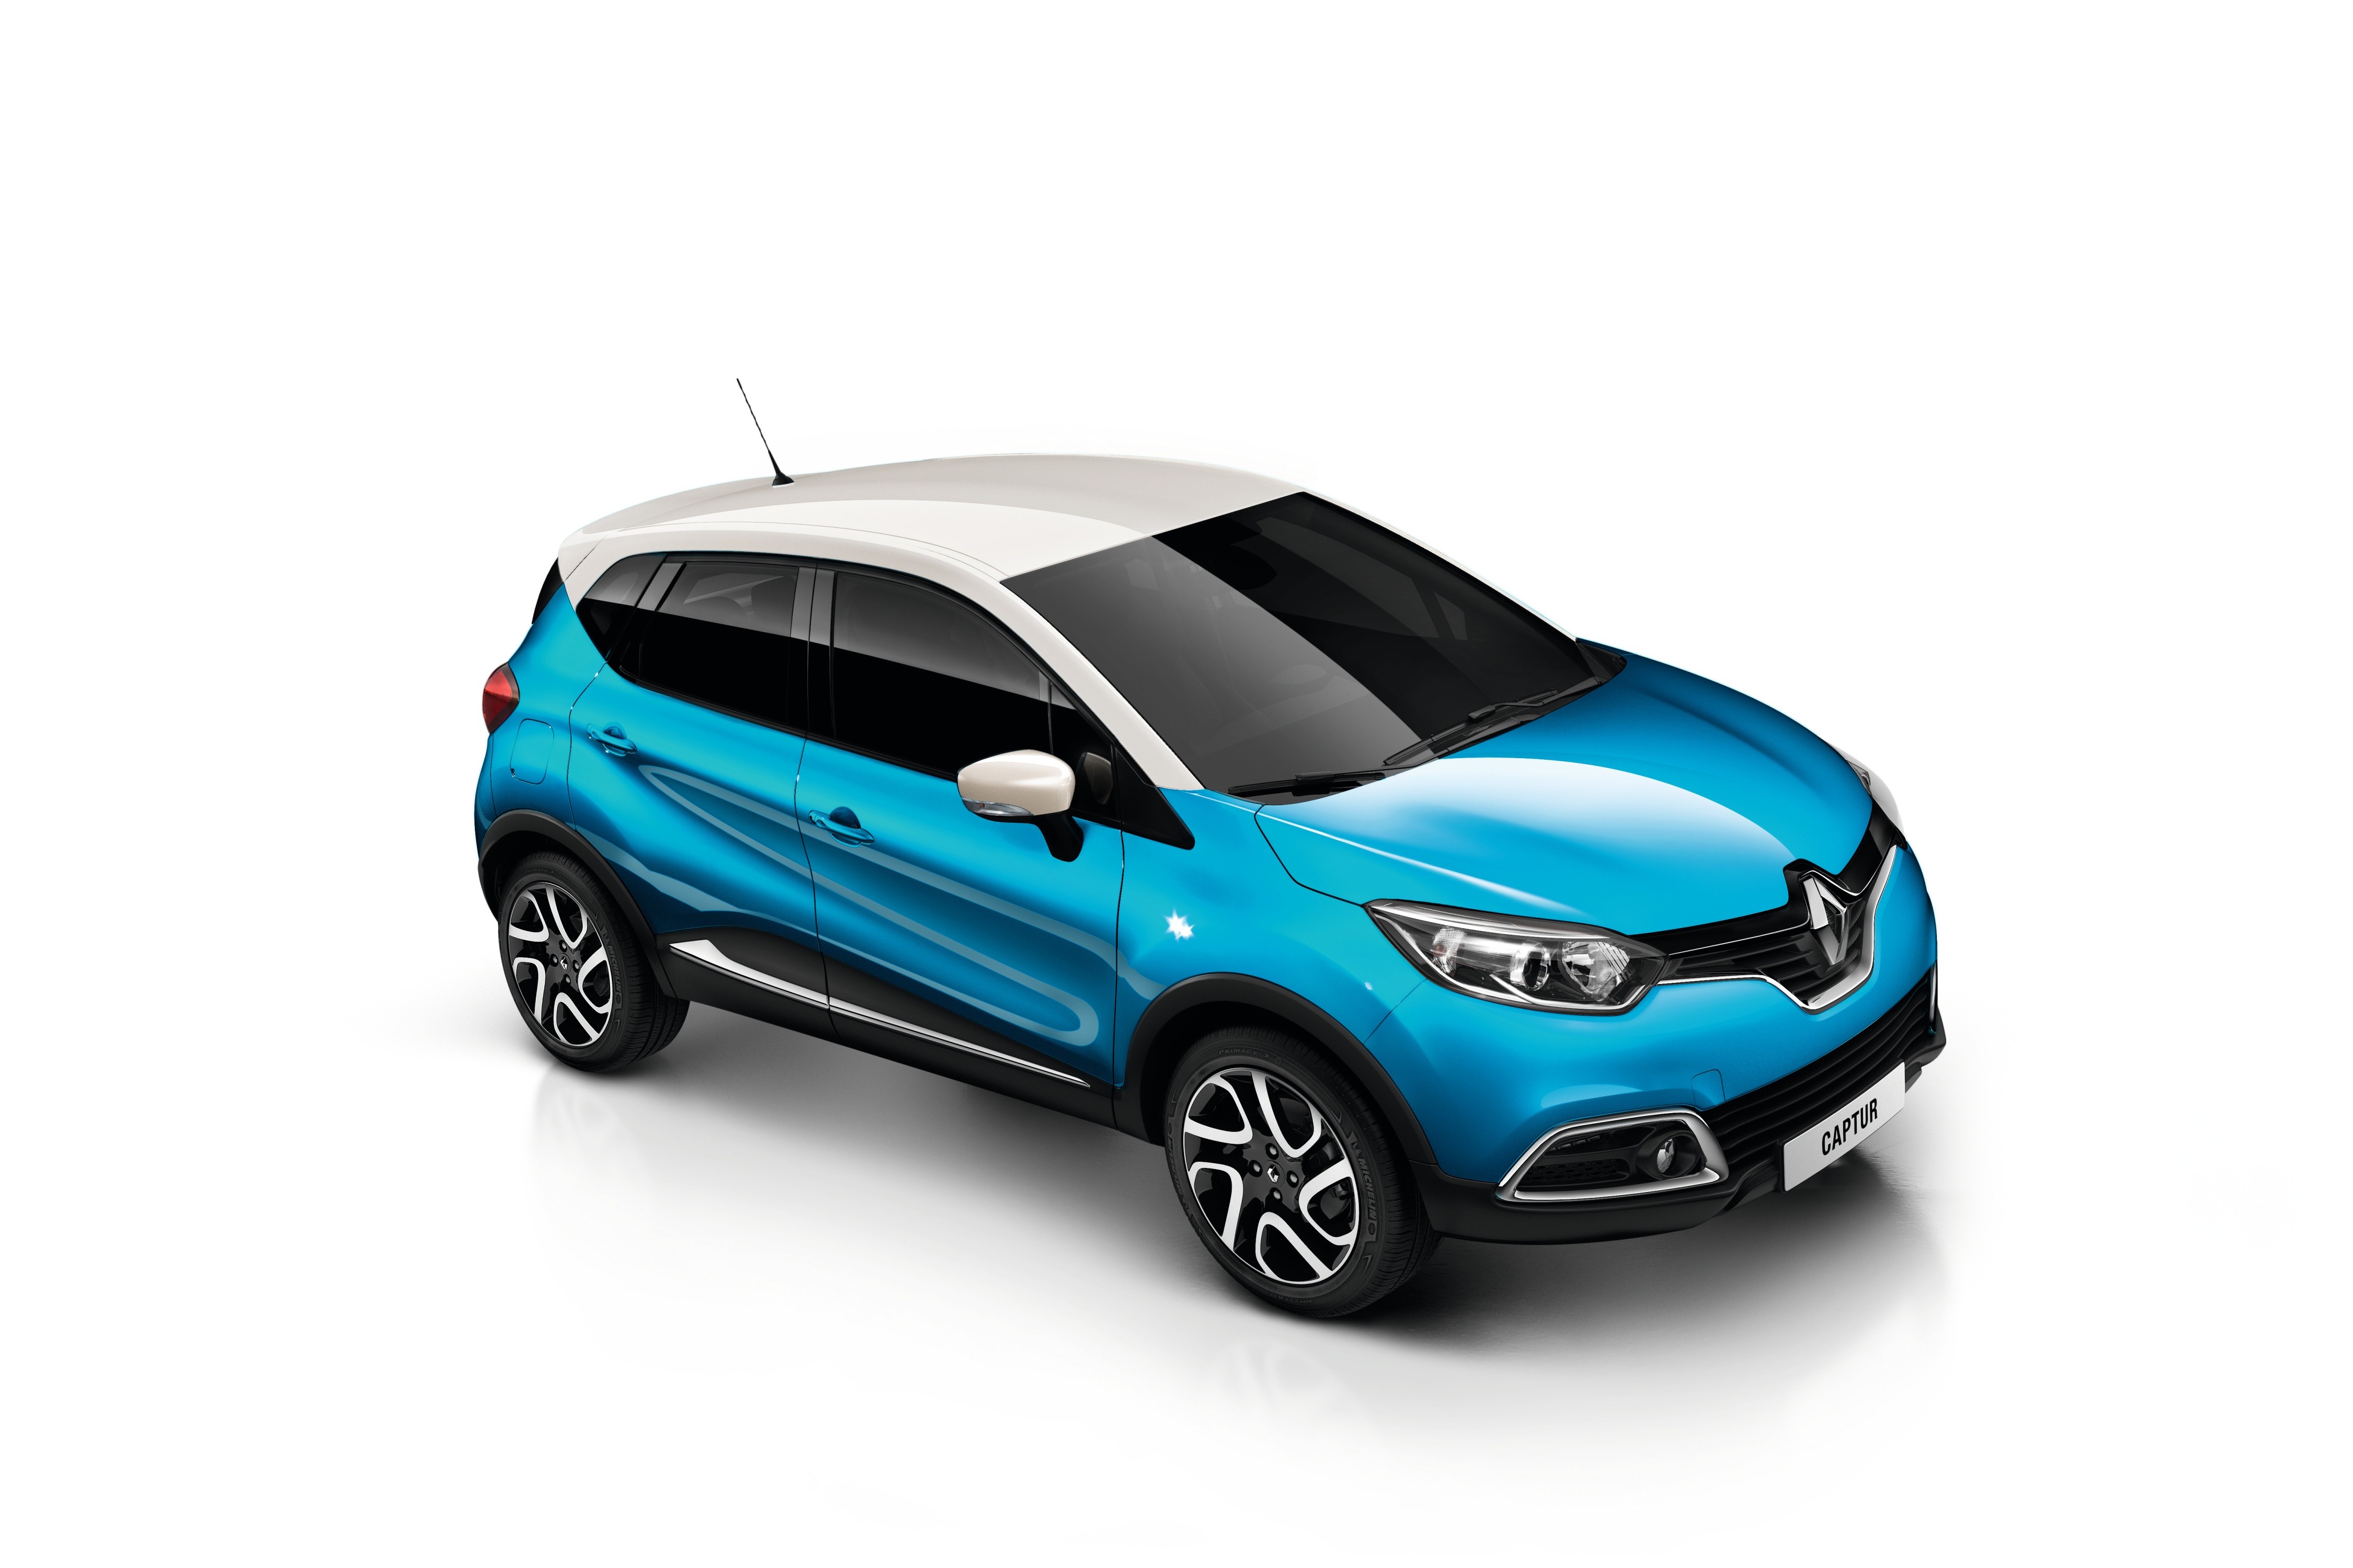 The Renault Captur Preview - A new Urban Crossover in Malaysia